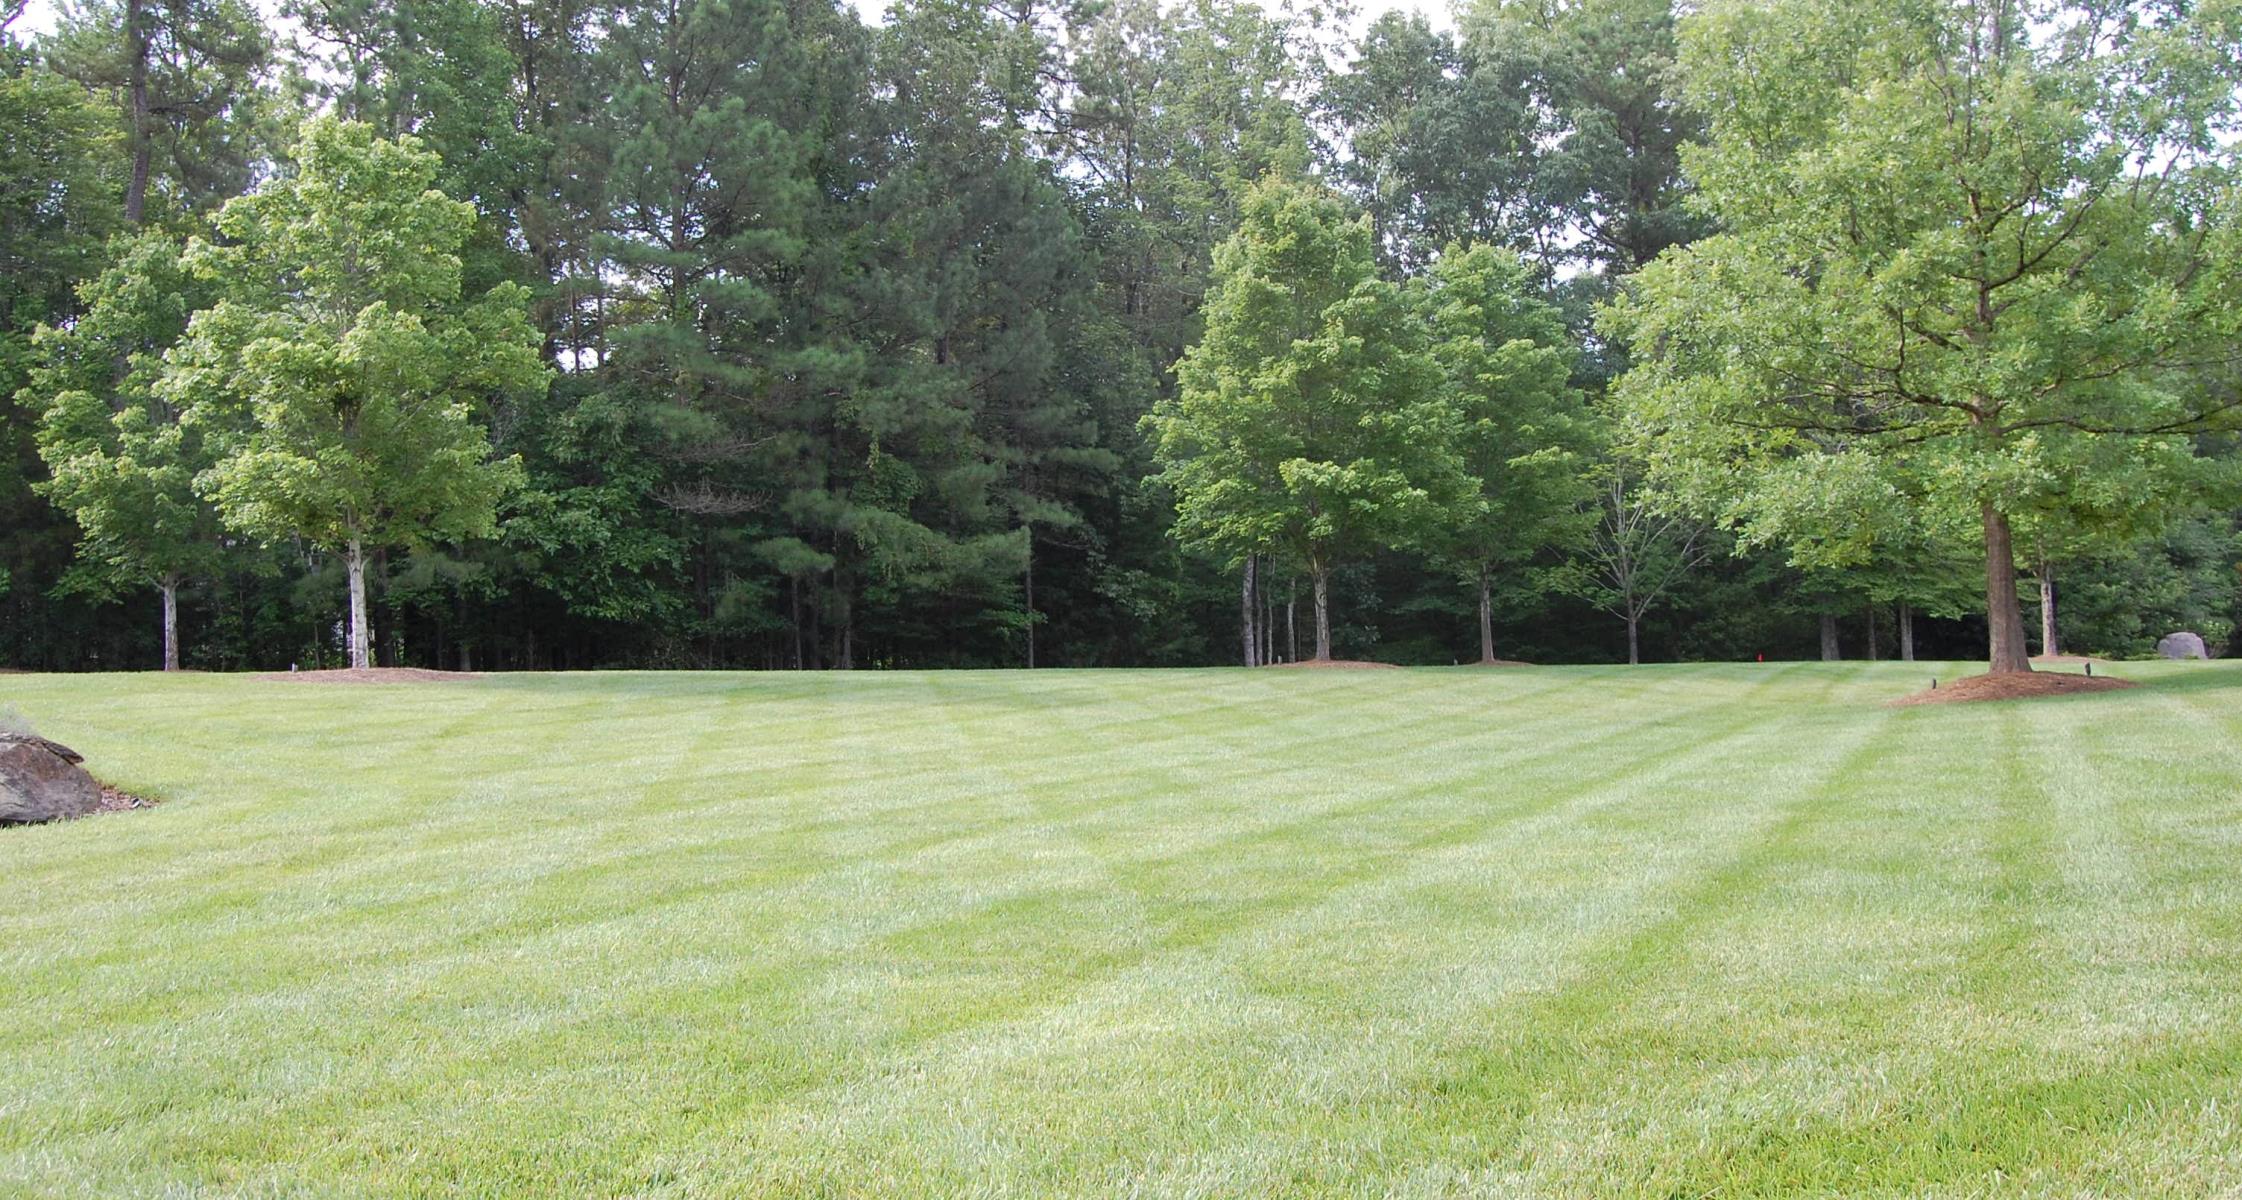 Should you choose Fescue or Bermuda for your North Carolina lawn?